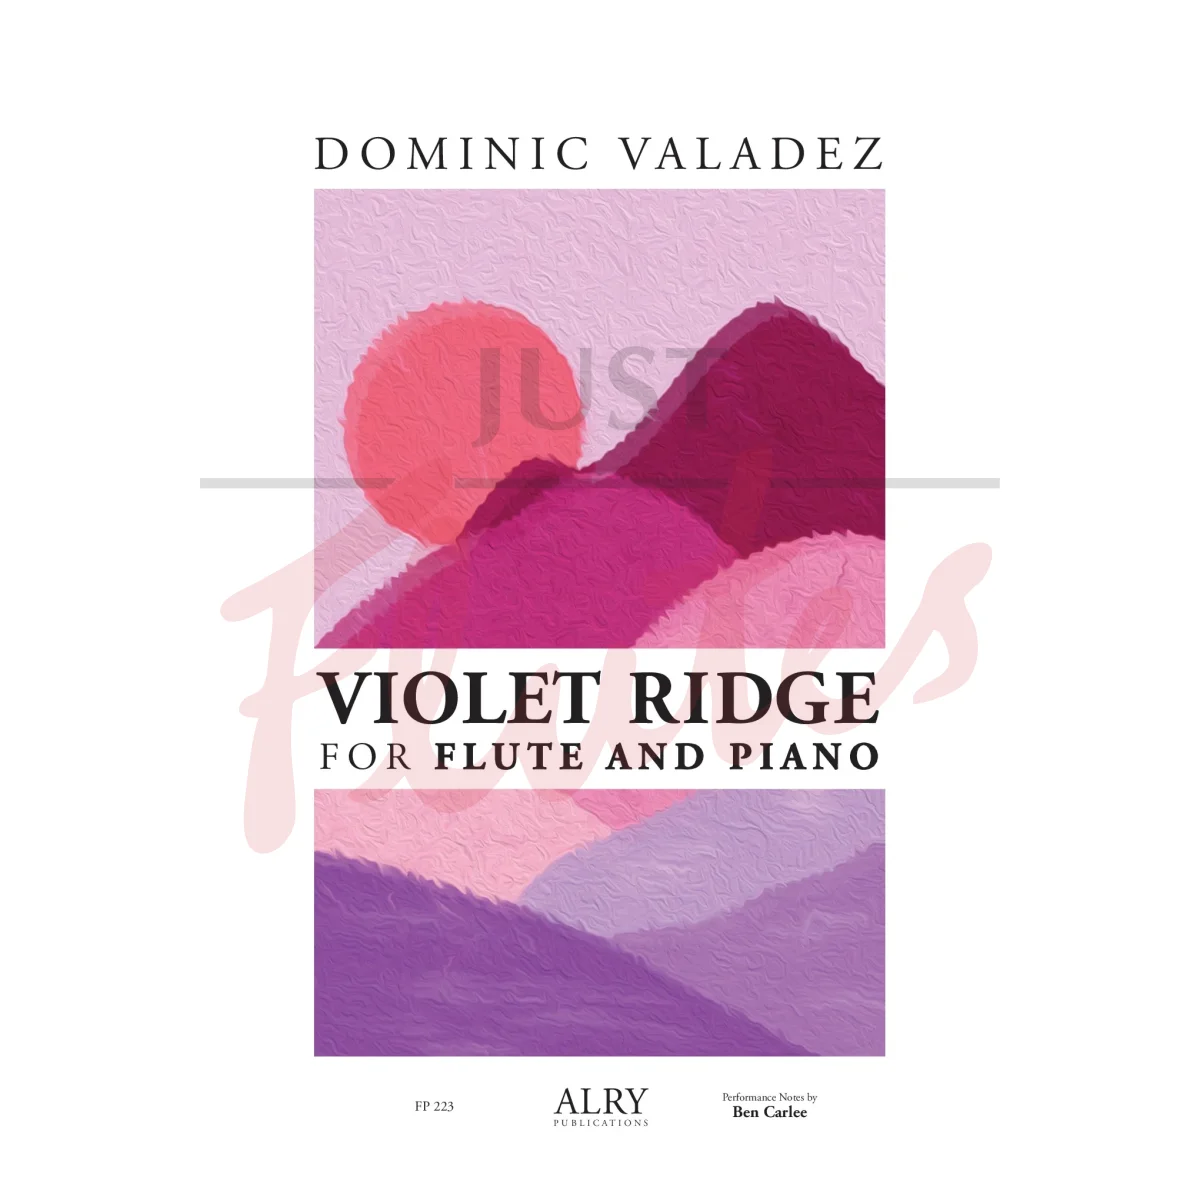 Violet Ridge for Flute and Piano